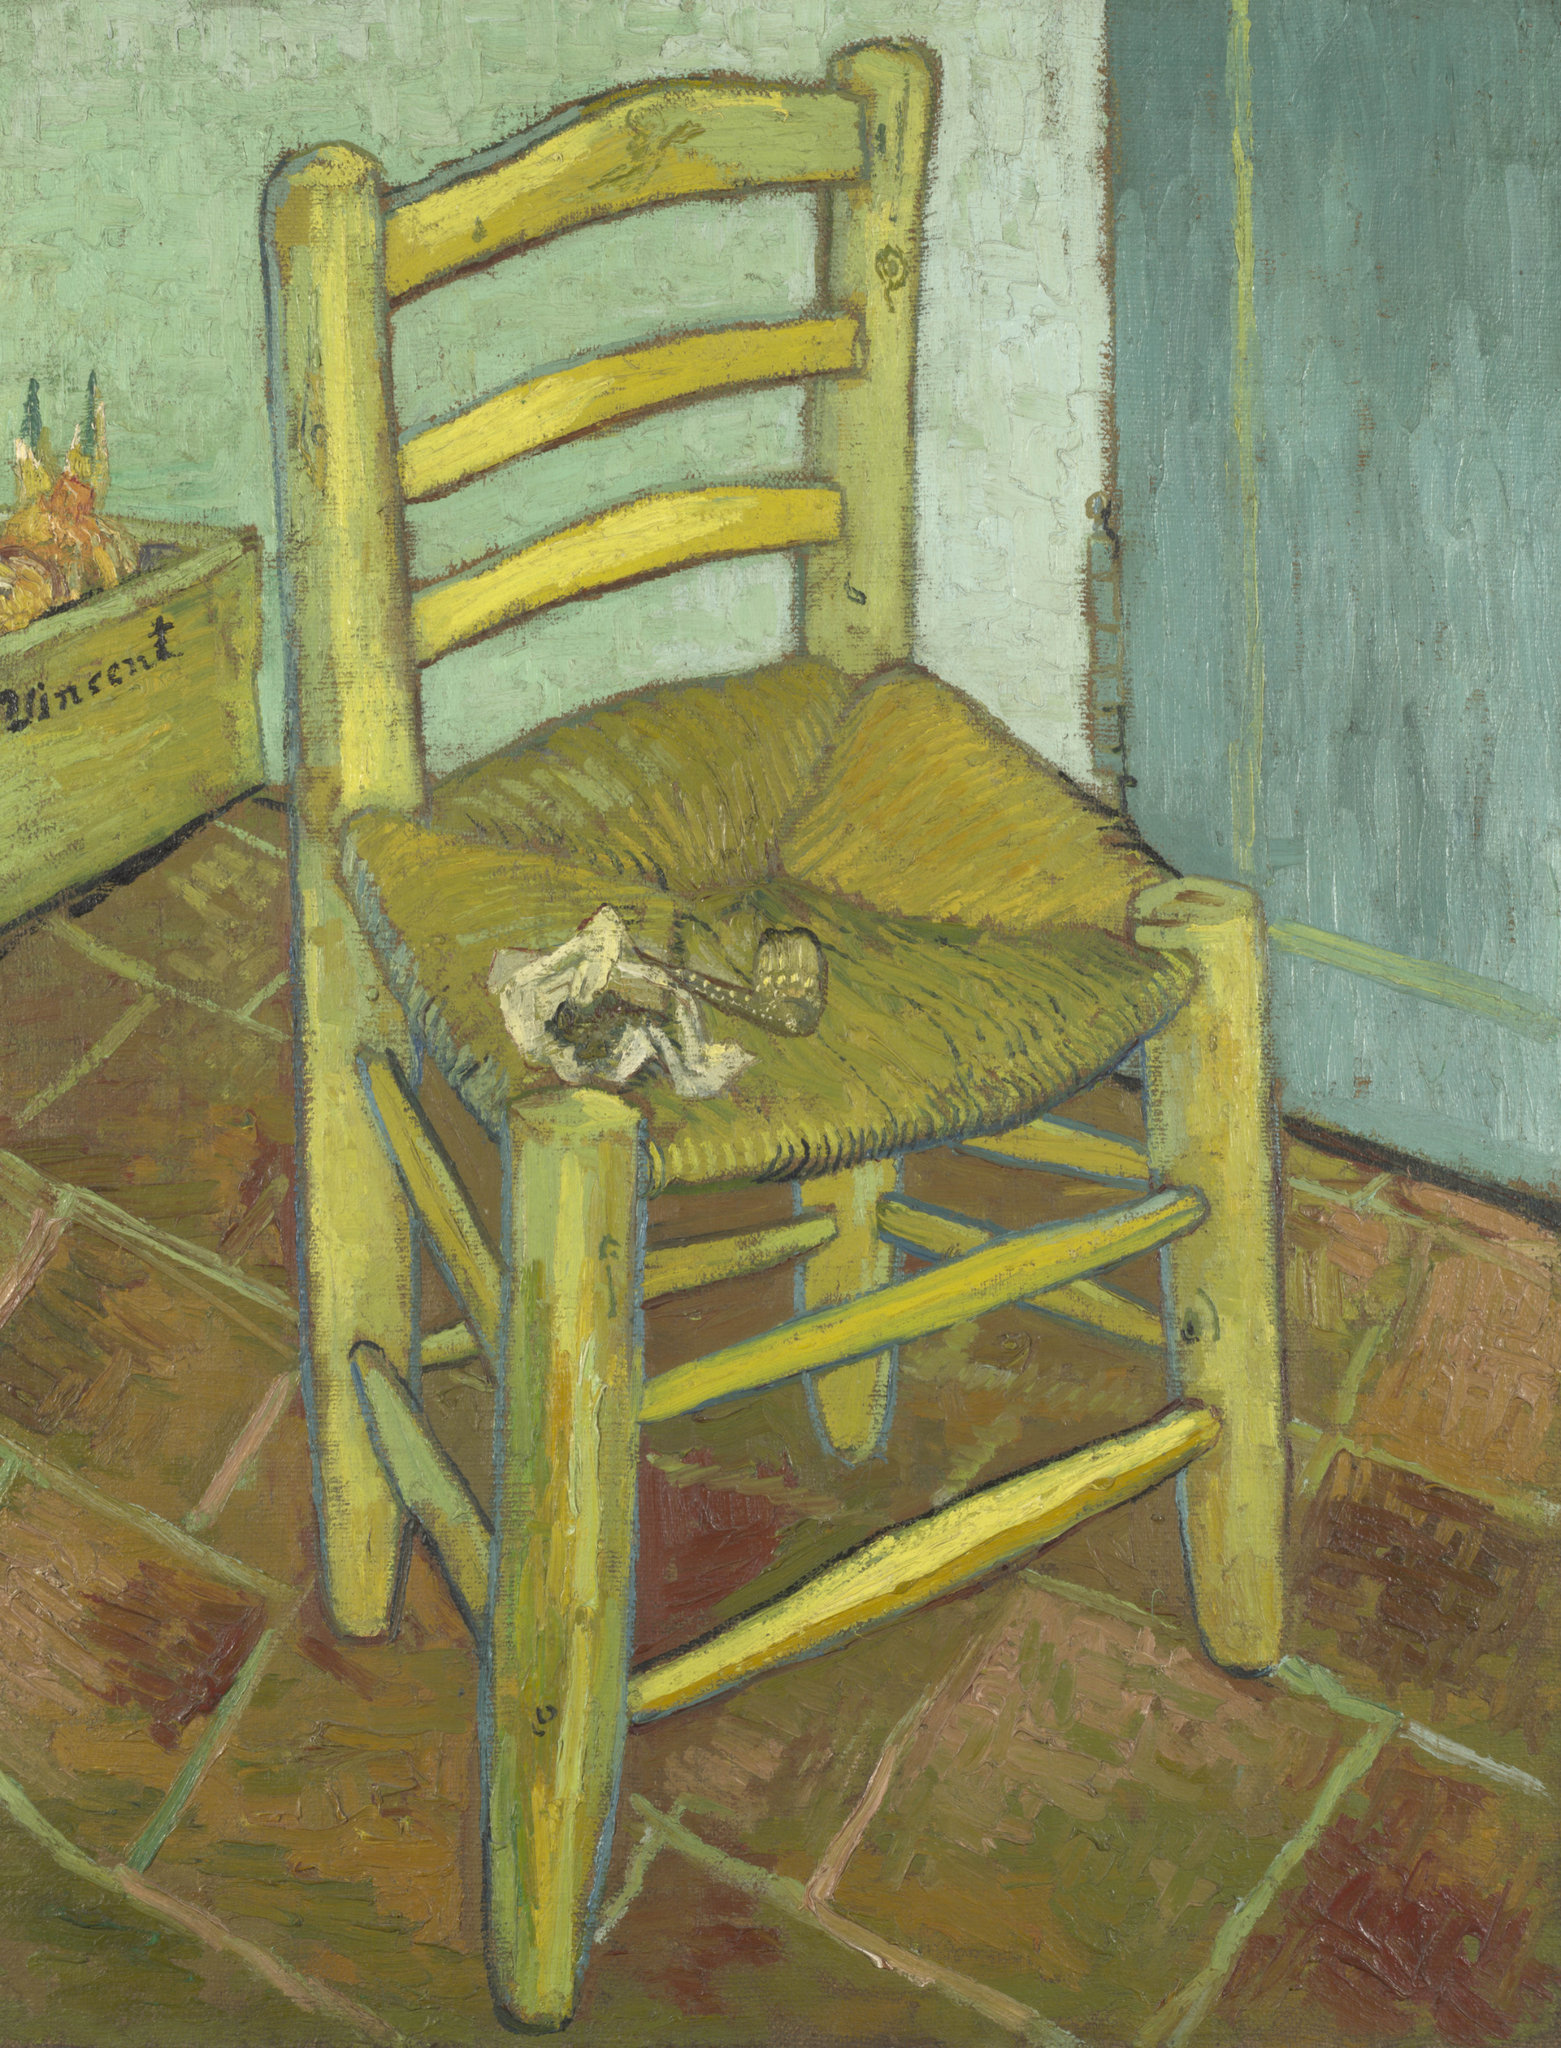 70 paintings in 70 days: Van Gogh's astonishing achievement at the end of  his life, Van Gogh 